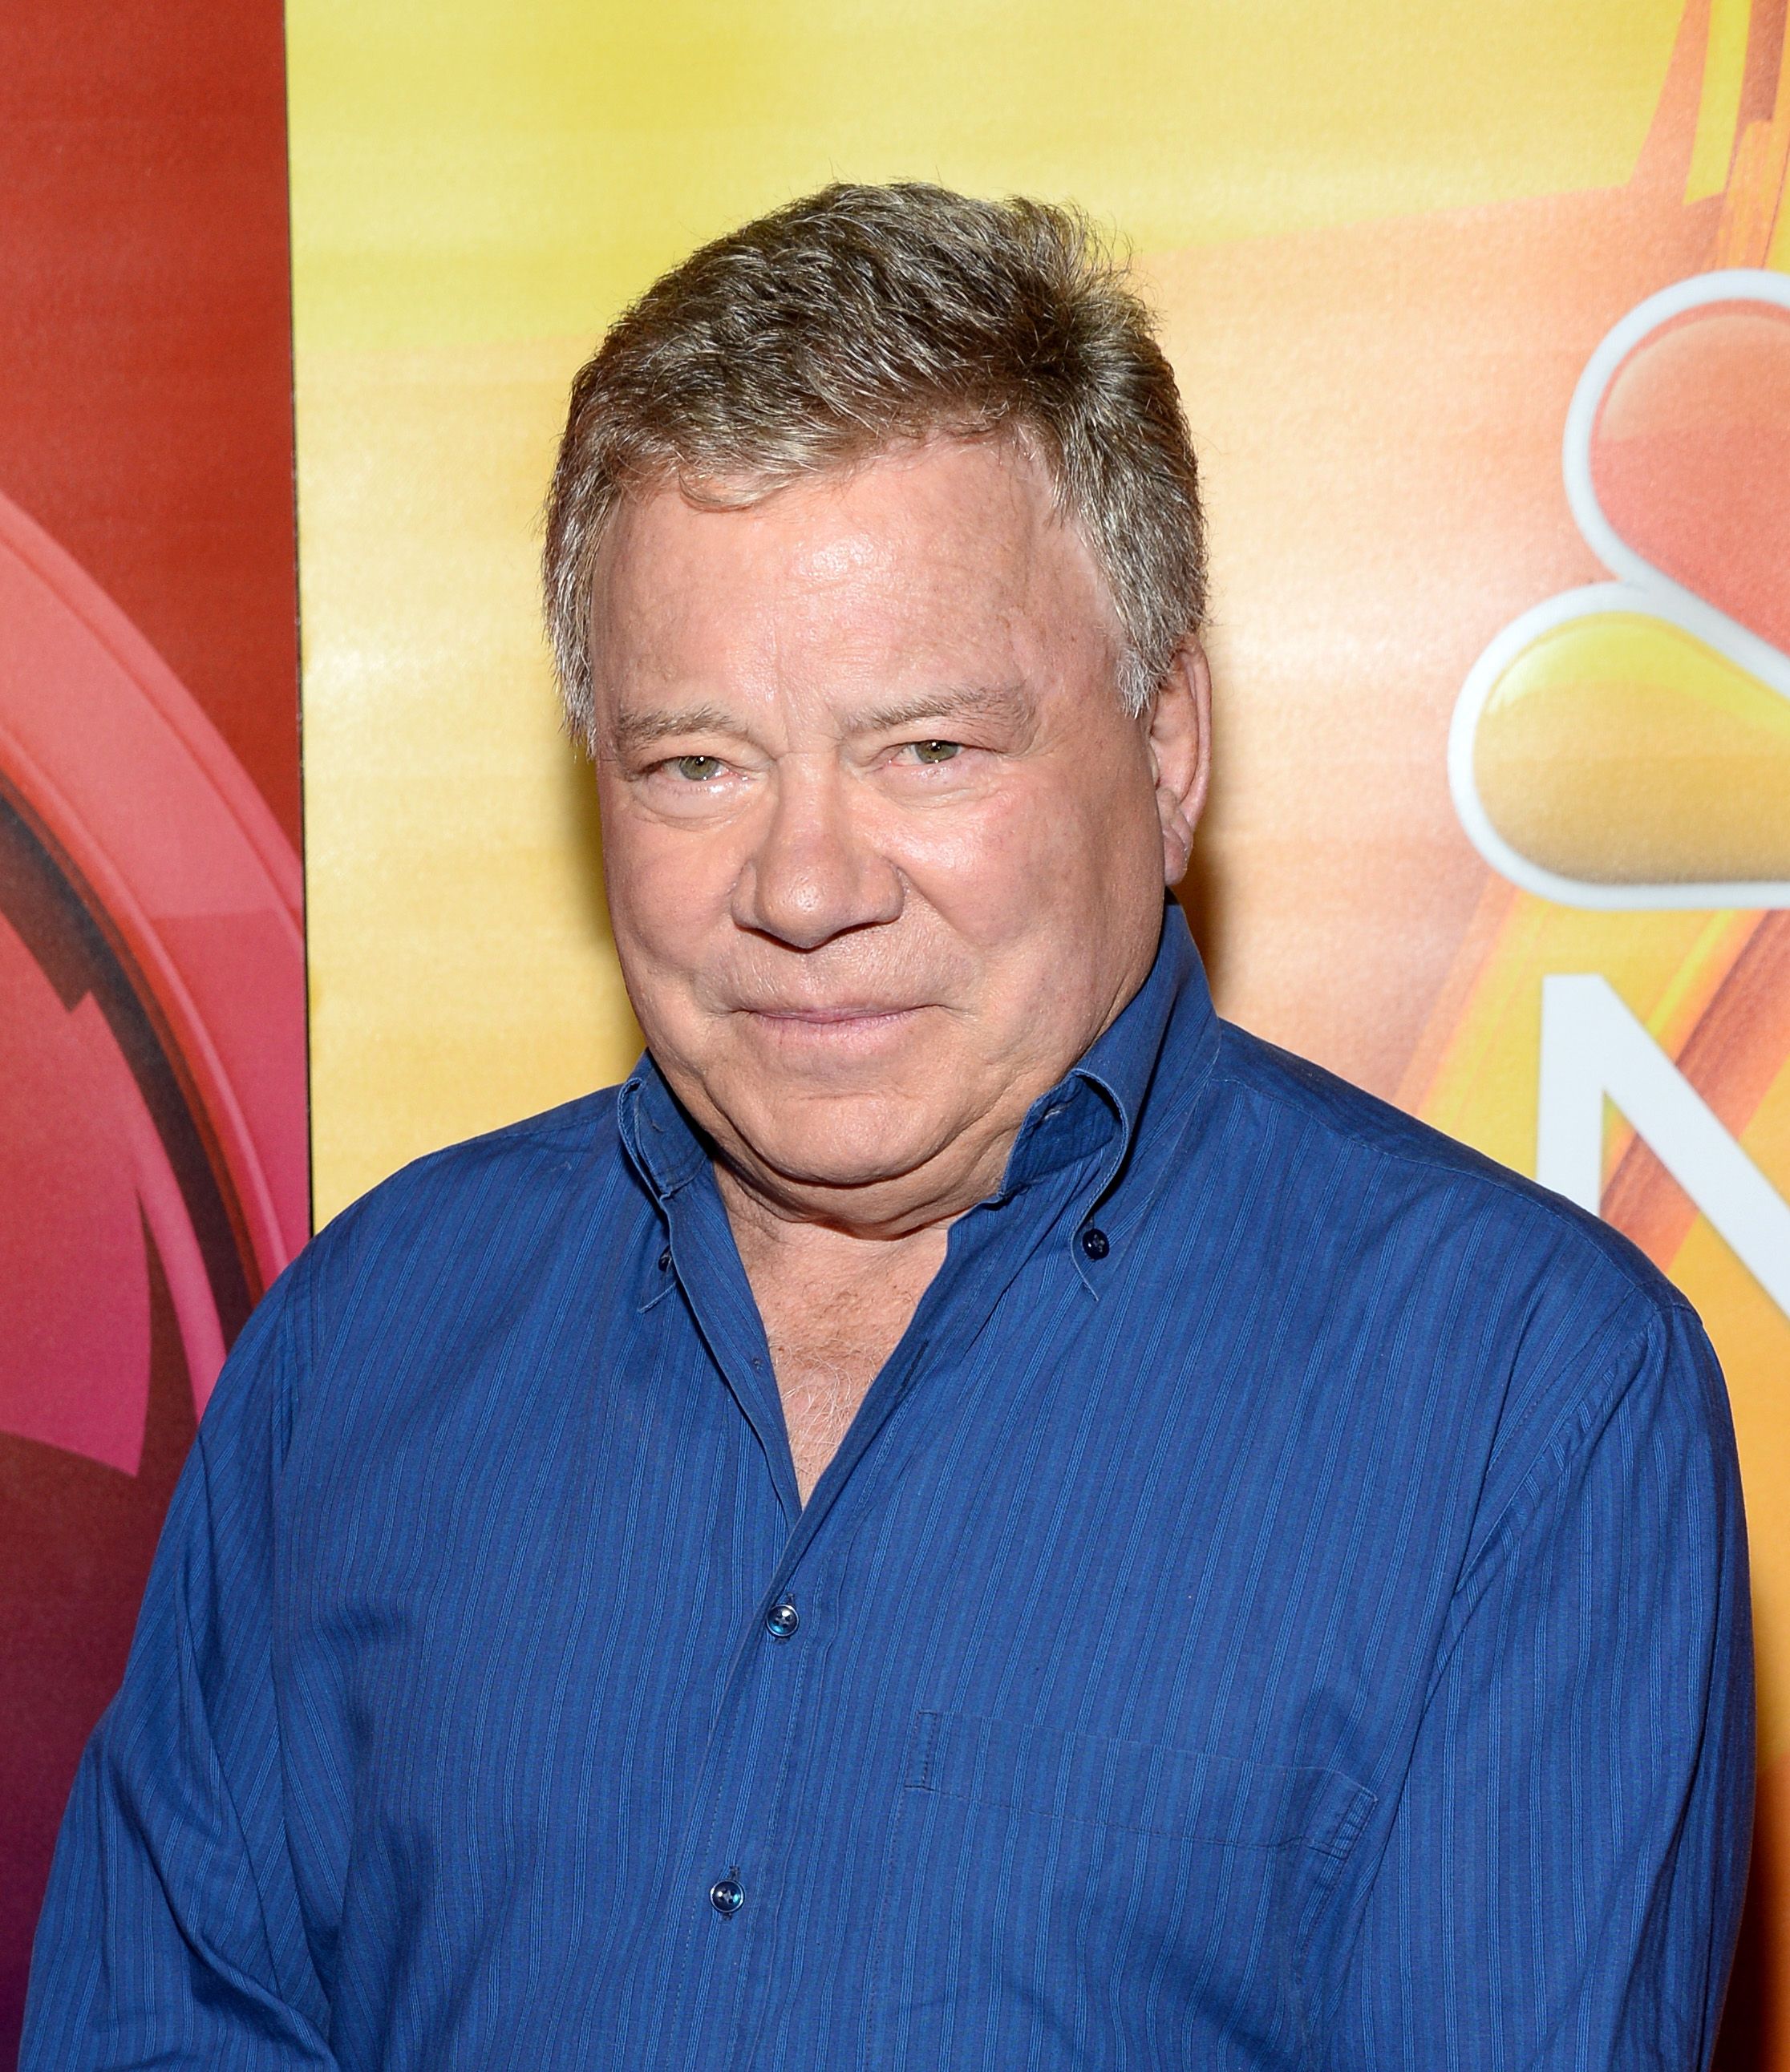  William Shatner at the NBCUniversal press day at The Beverly Hilton Hotel on August 2, 2016 | Getty Images